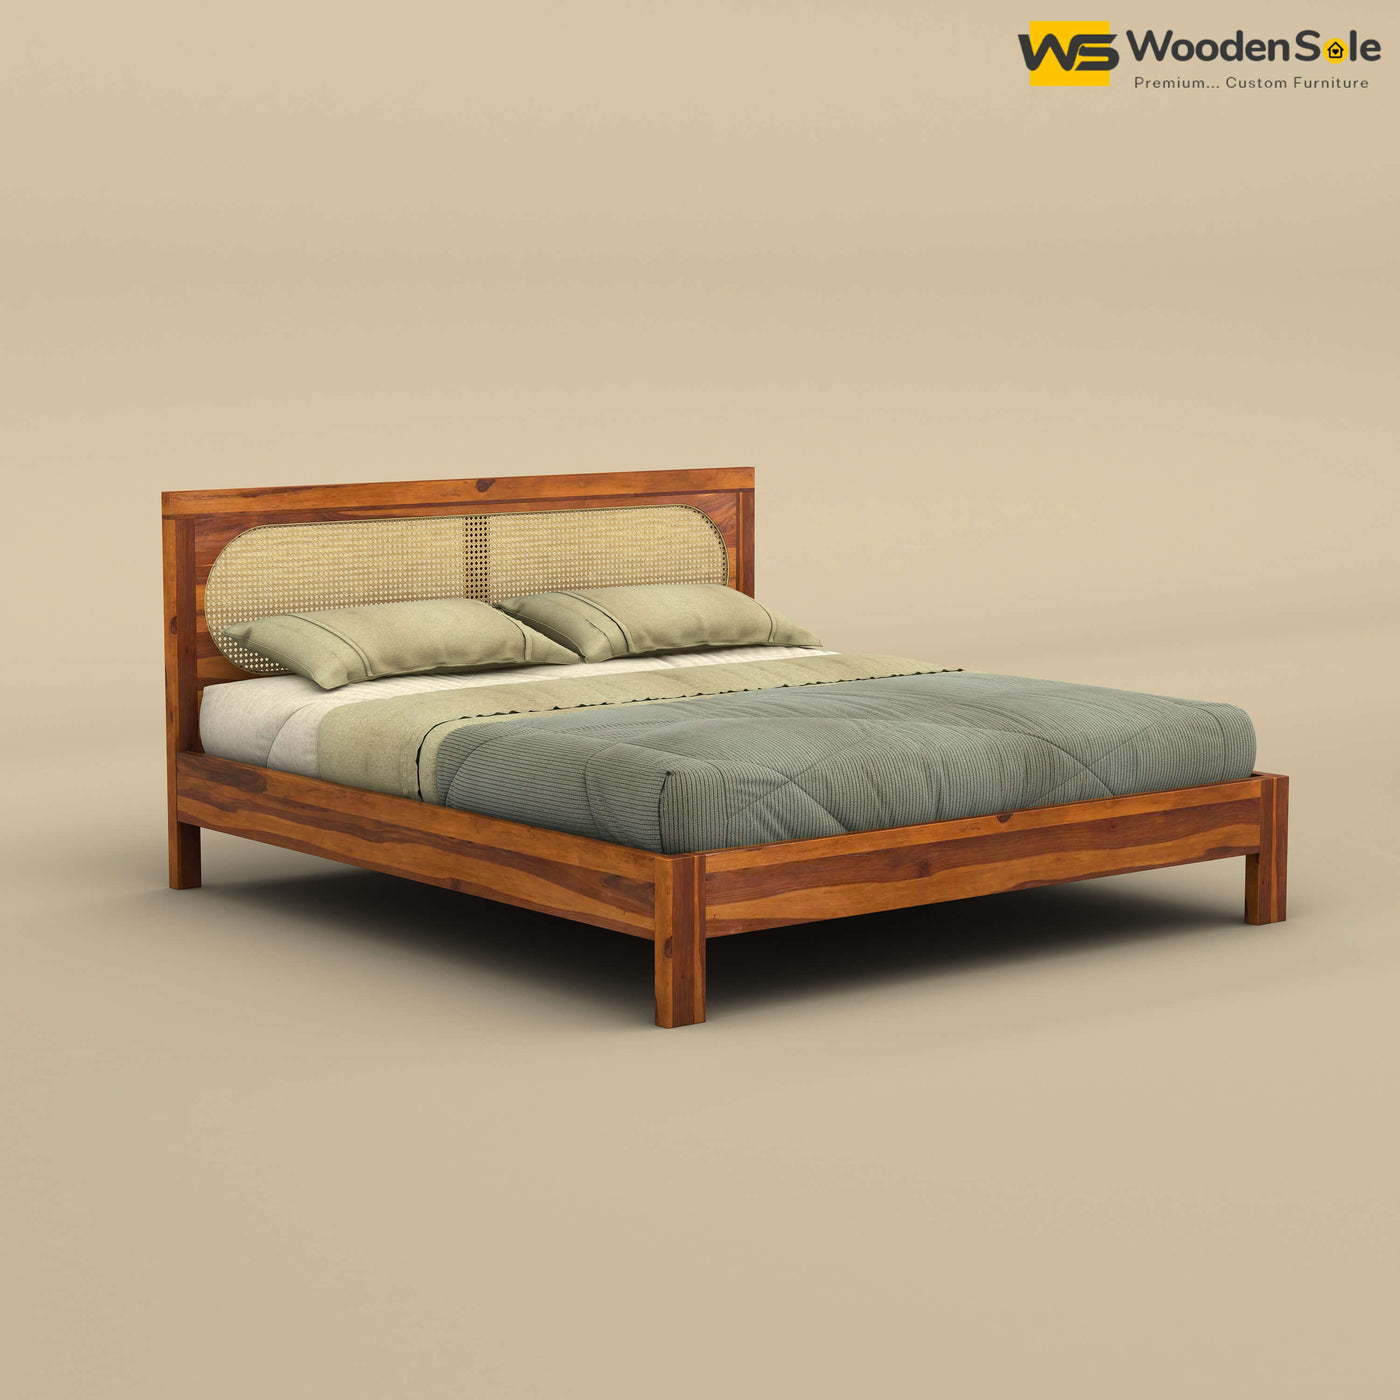 Wooden Sole Caning Bed (King Size, Honey Finish)